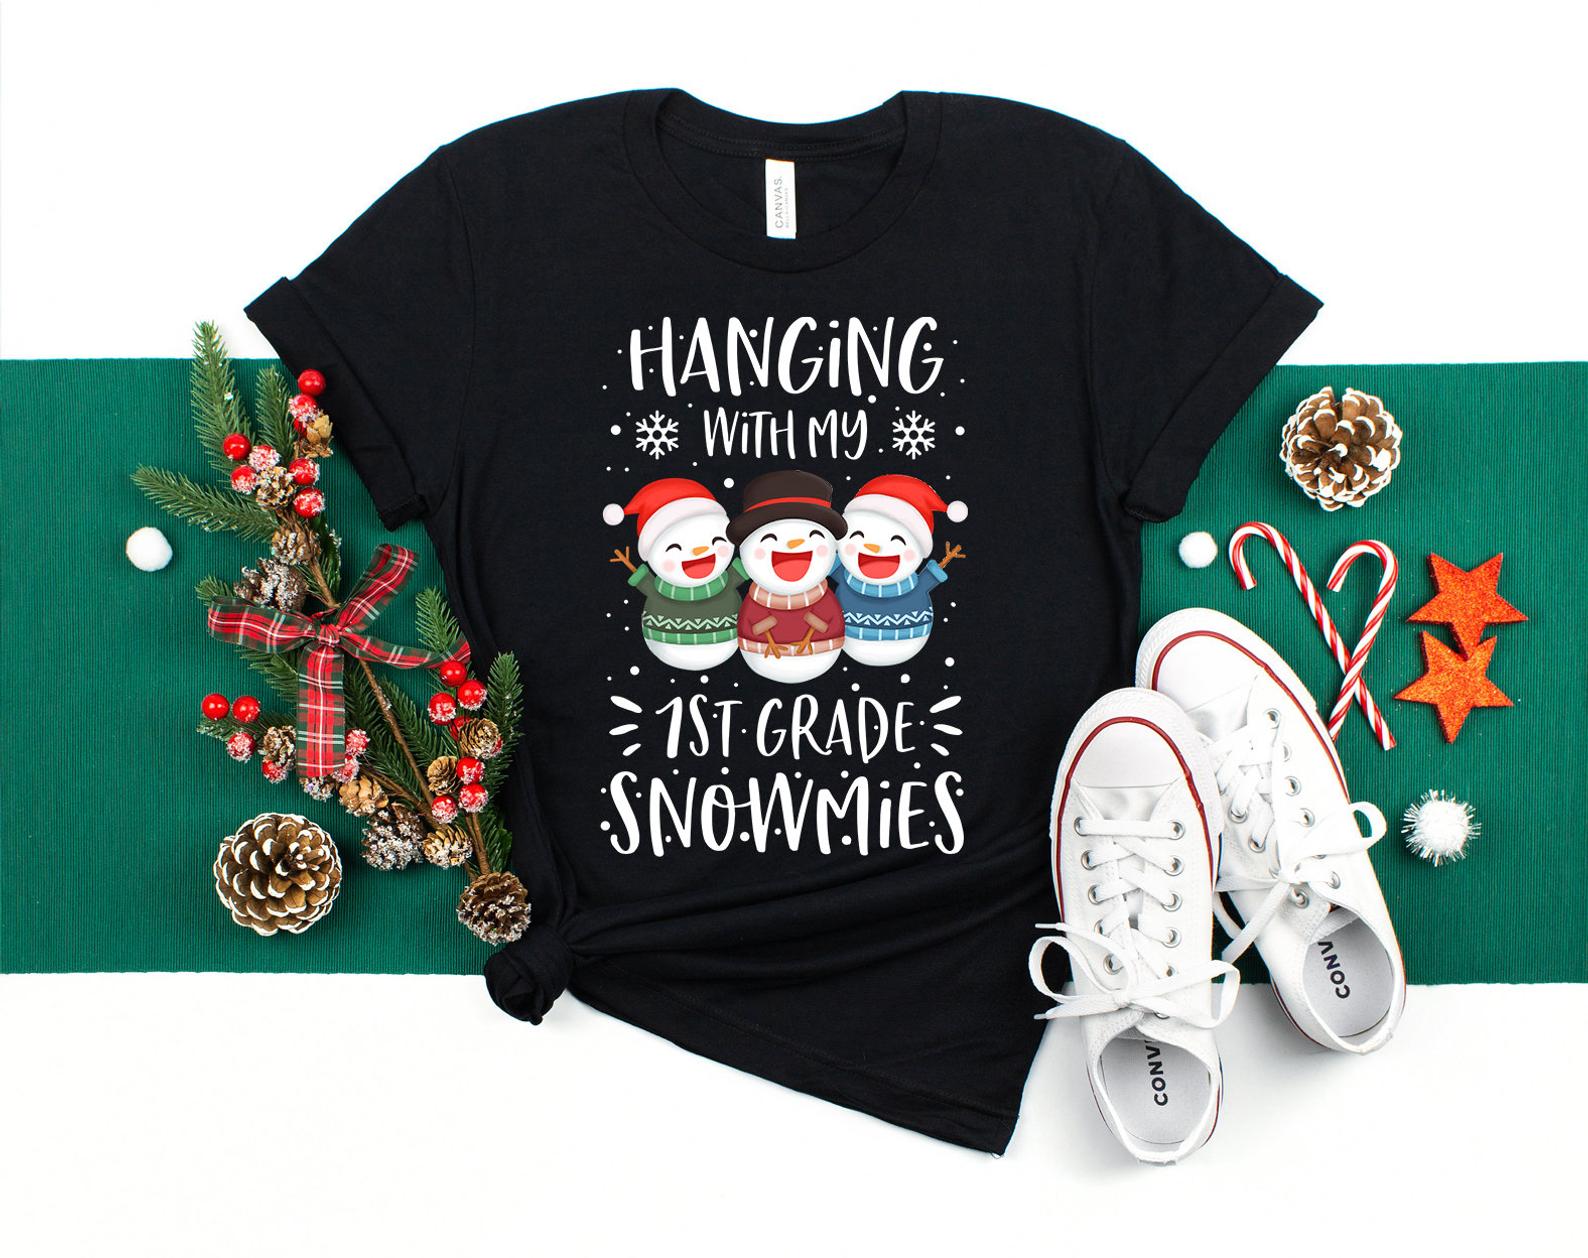 Hanging With My 1st Grade Snowmies T Shirt Black Unisex S-6XL